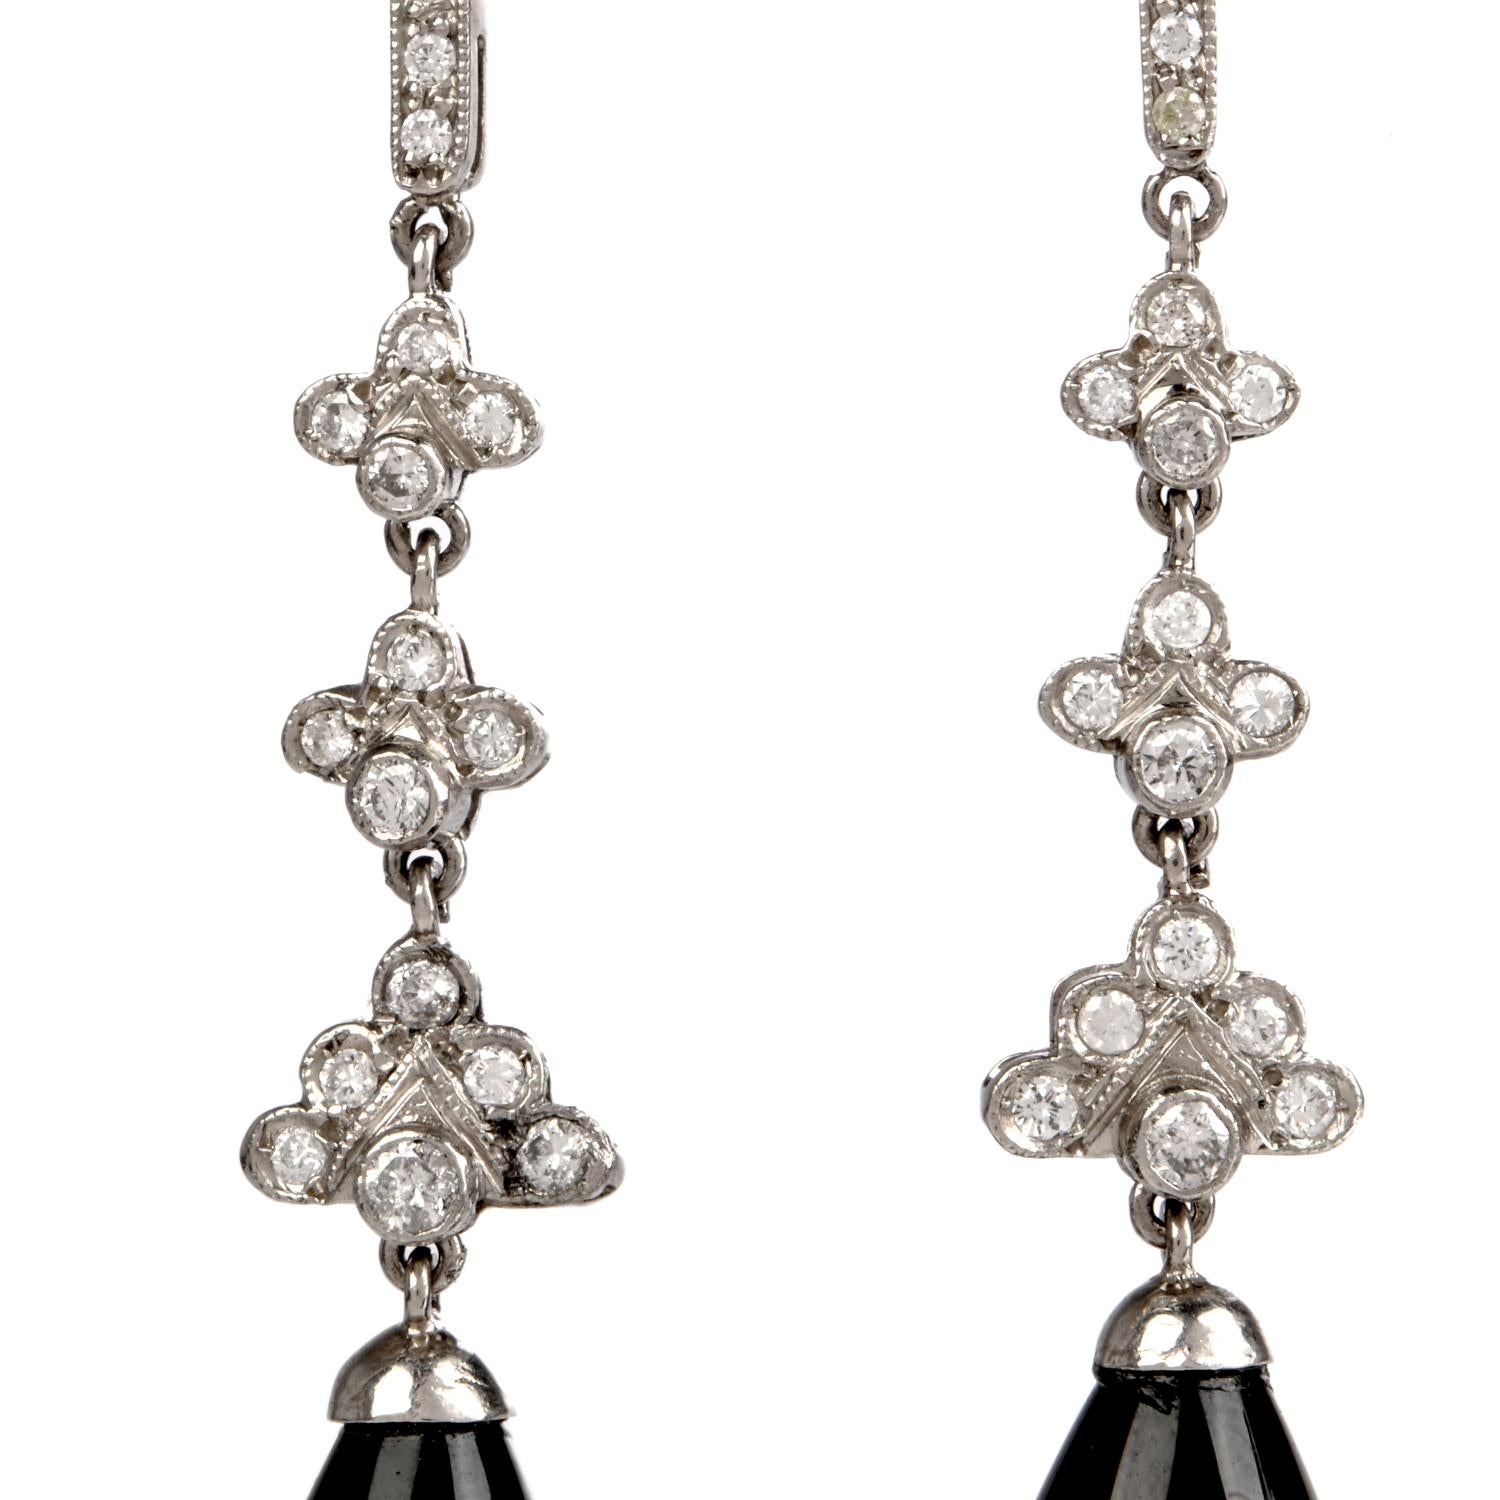 These fashionable diamond & onyx dangle drop earrings are crafted in solid platinum, weighing 9.7 grams and measuring 2 ¼ “long. Composed of a beautiful diamond studded drop featuring 38 round diamonds, bezel and prong set, collectively weighing